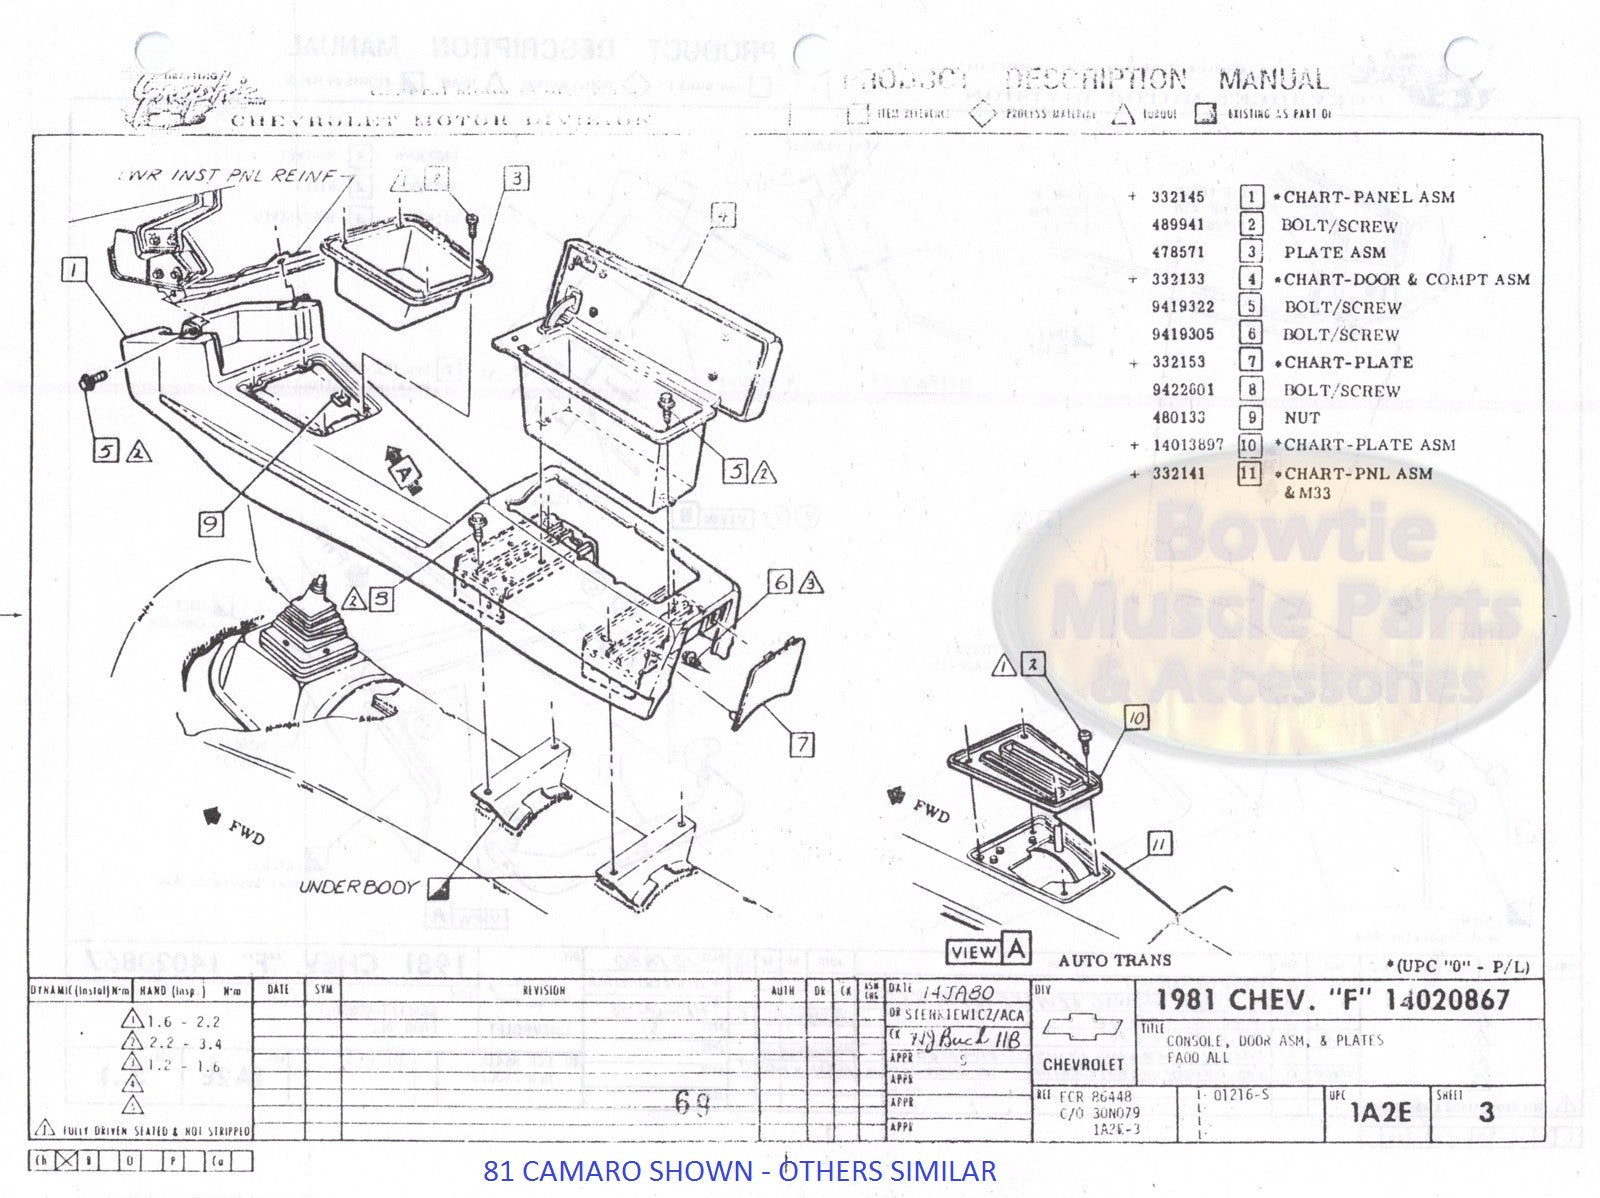 67 72 chevy truck assembly manual pdf